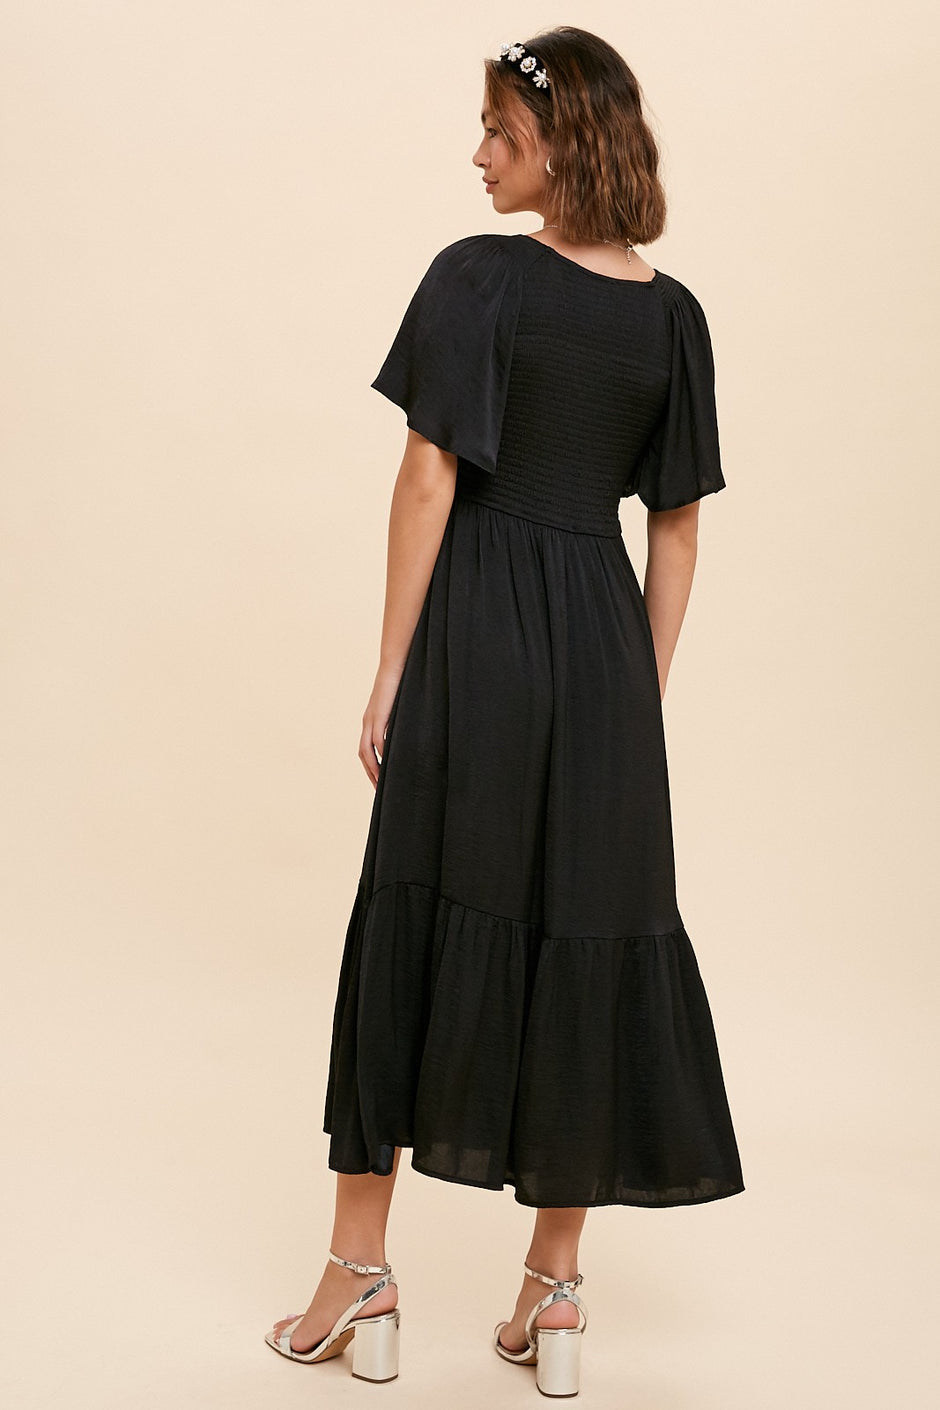 Women’s Modest Dresses & Modest Clothing - SexyModest Boutique – Page 5